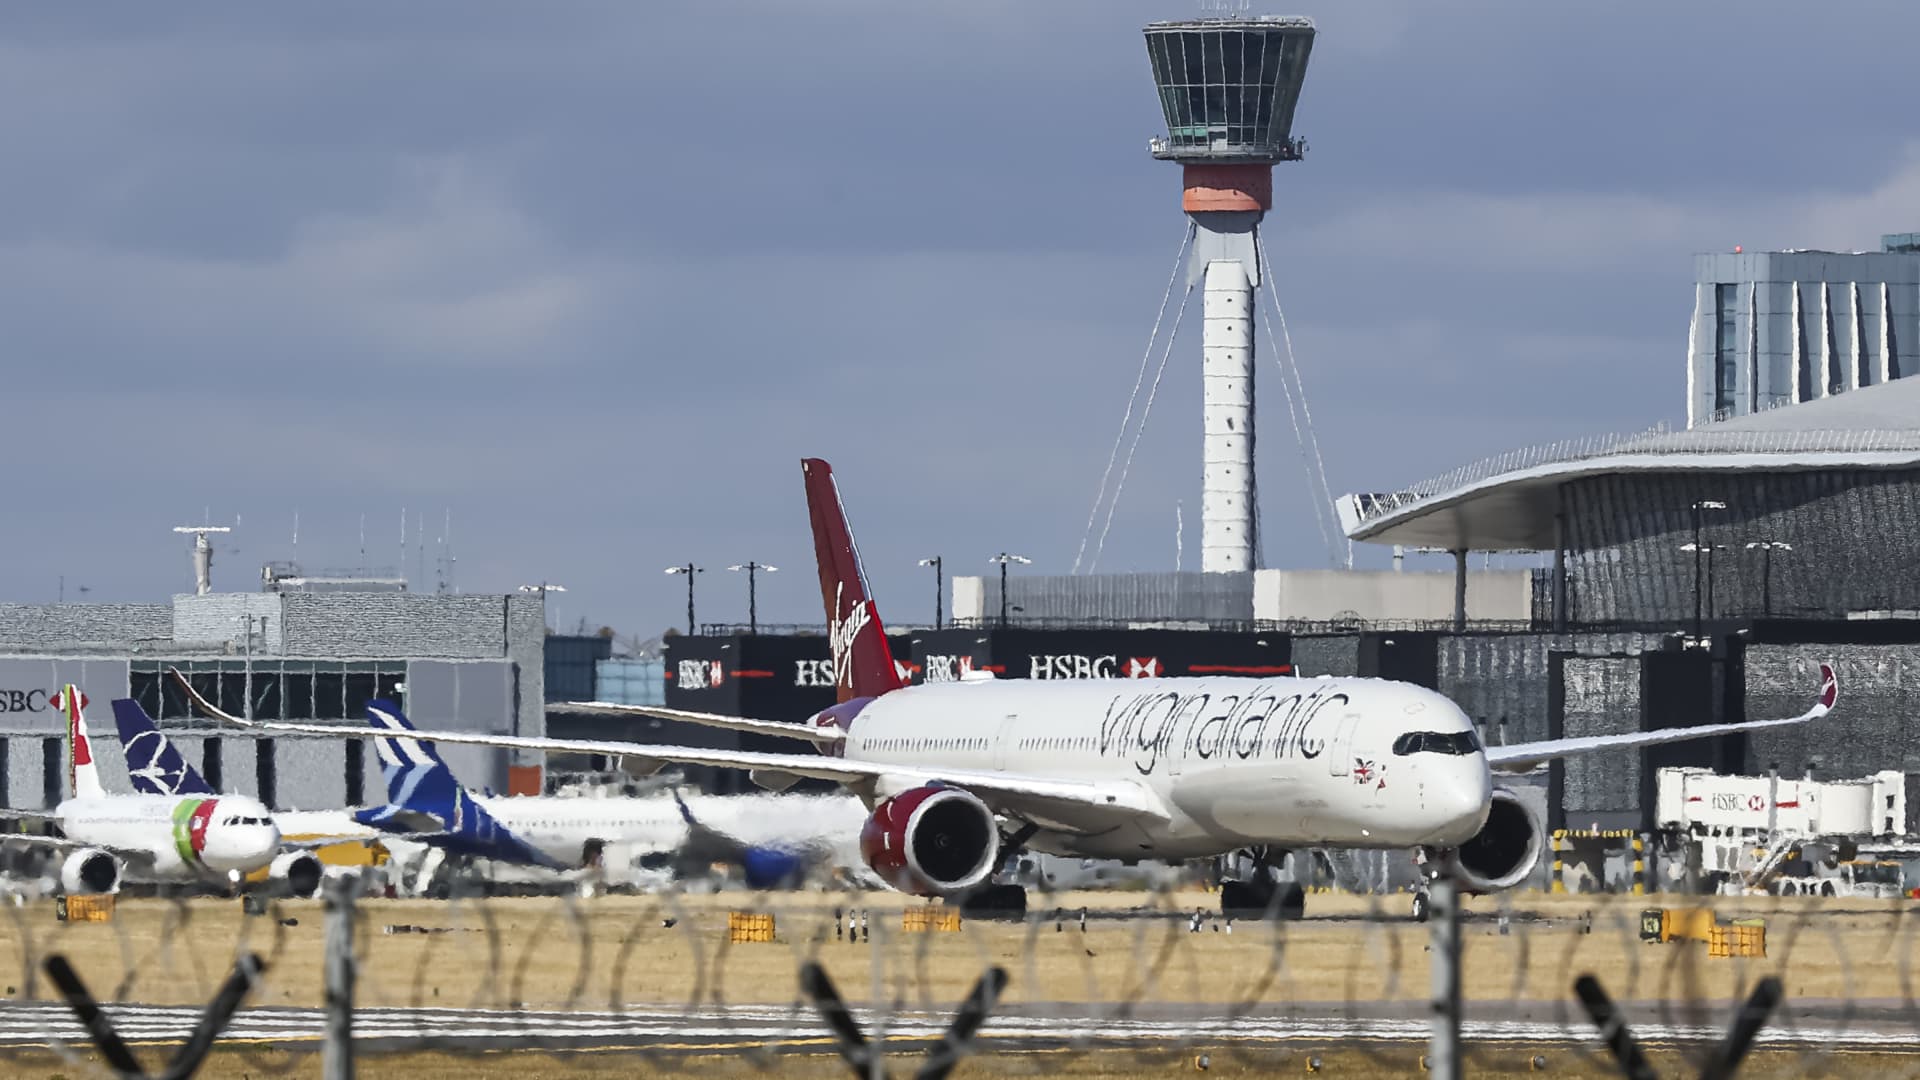 UK flights resume after air traffic control ‘technical issue’ causes holiday delays